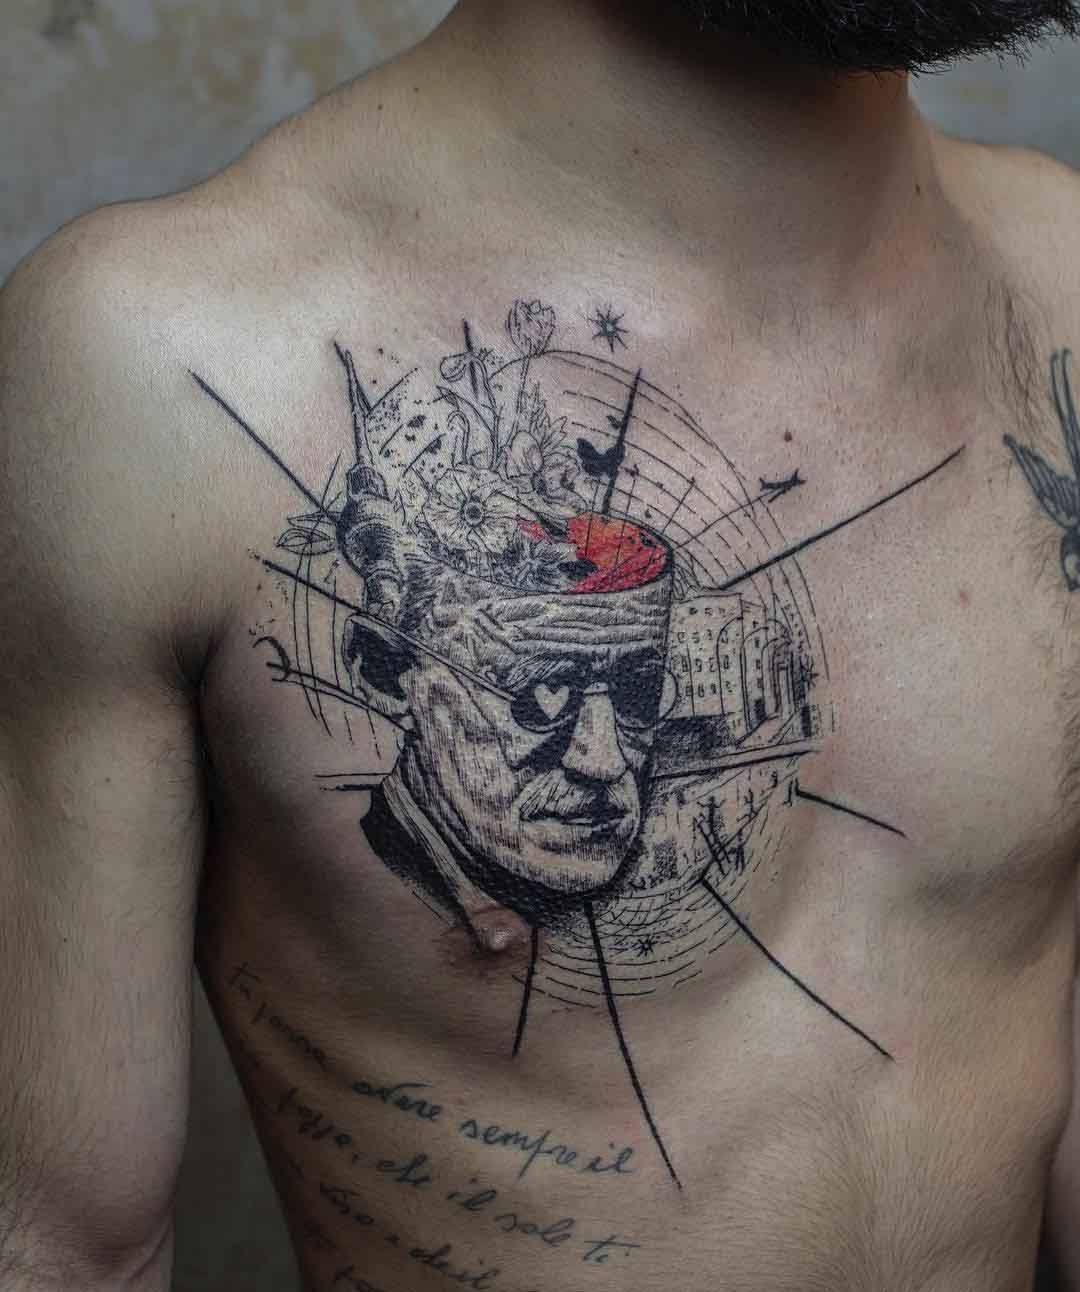 Abstract Thinking Tattoo on Chest - Best Tattoo Ideas Gallery